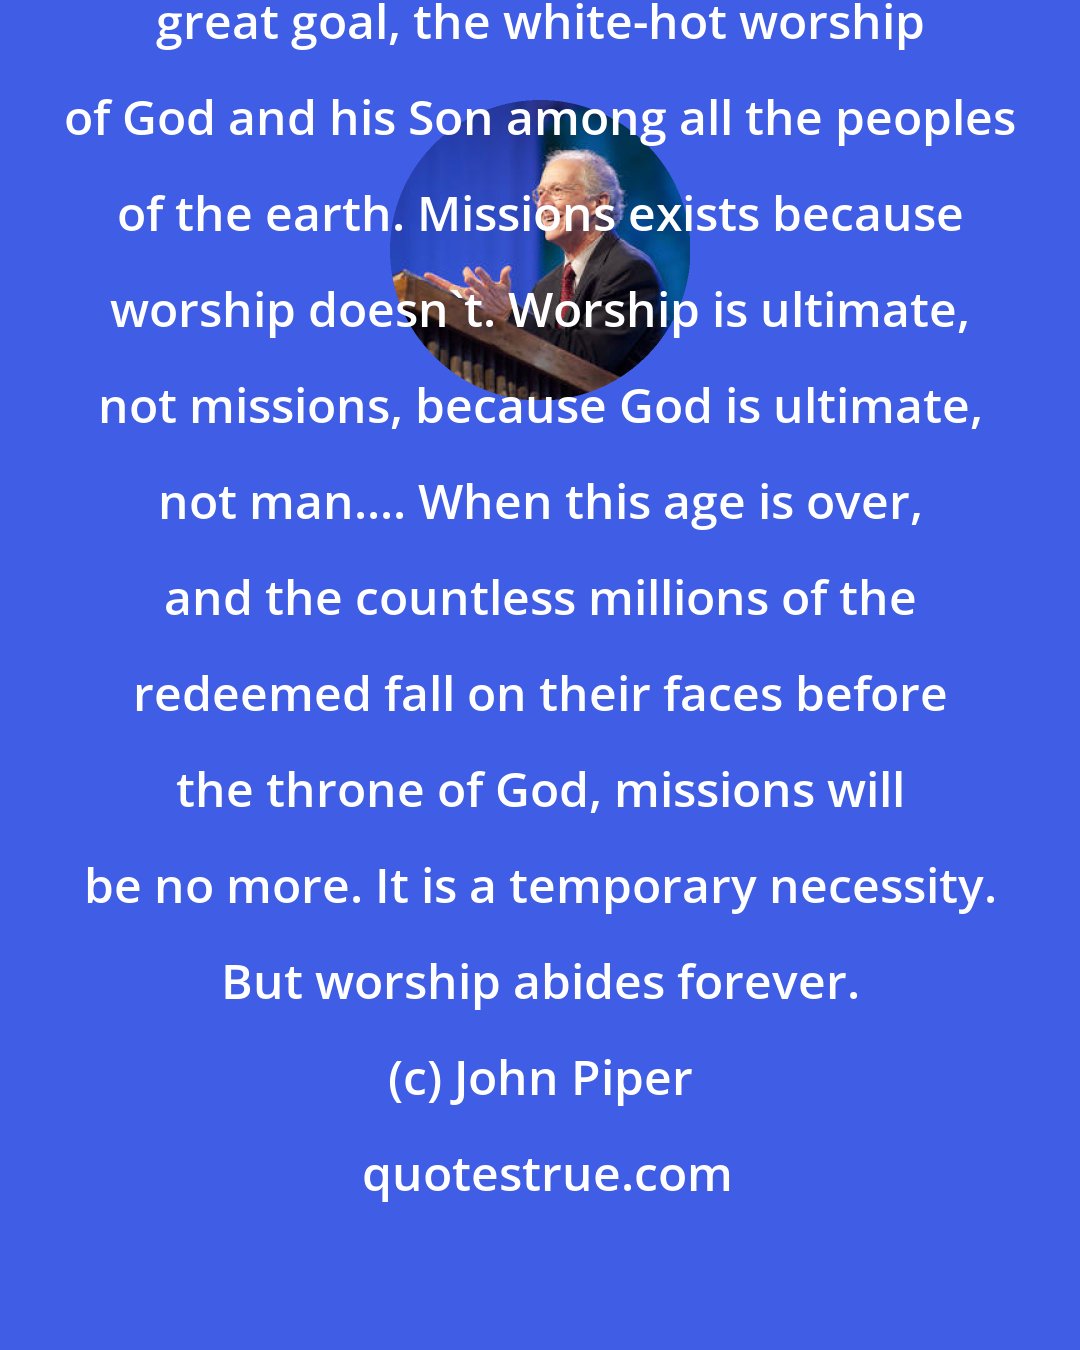 John Piper: All of history is moving toward one great goal, the white-hot worship of God and his Son among all the peoples of the earth. Missions exists because worship doesn't. Worship is ultimate, not missions, because God is ultimate, not man.... When this age is over, and the countless millions of the redeemed fall on their faces before the throne of God, missions will be no more. It is a temporary necessity. But worship abides forever.